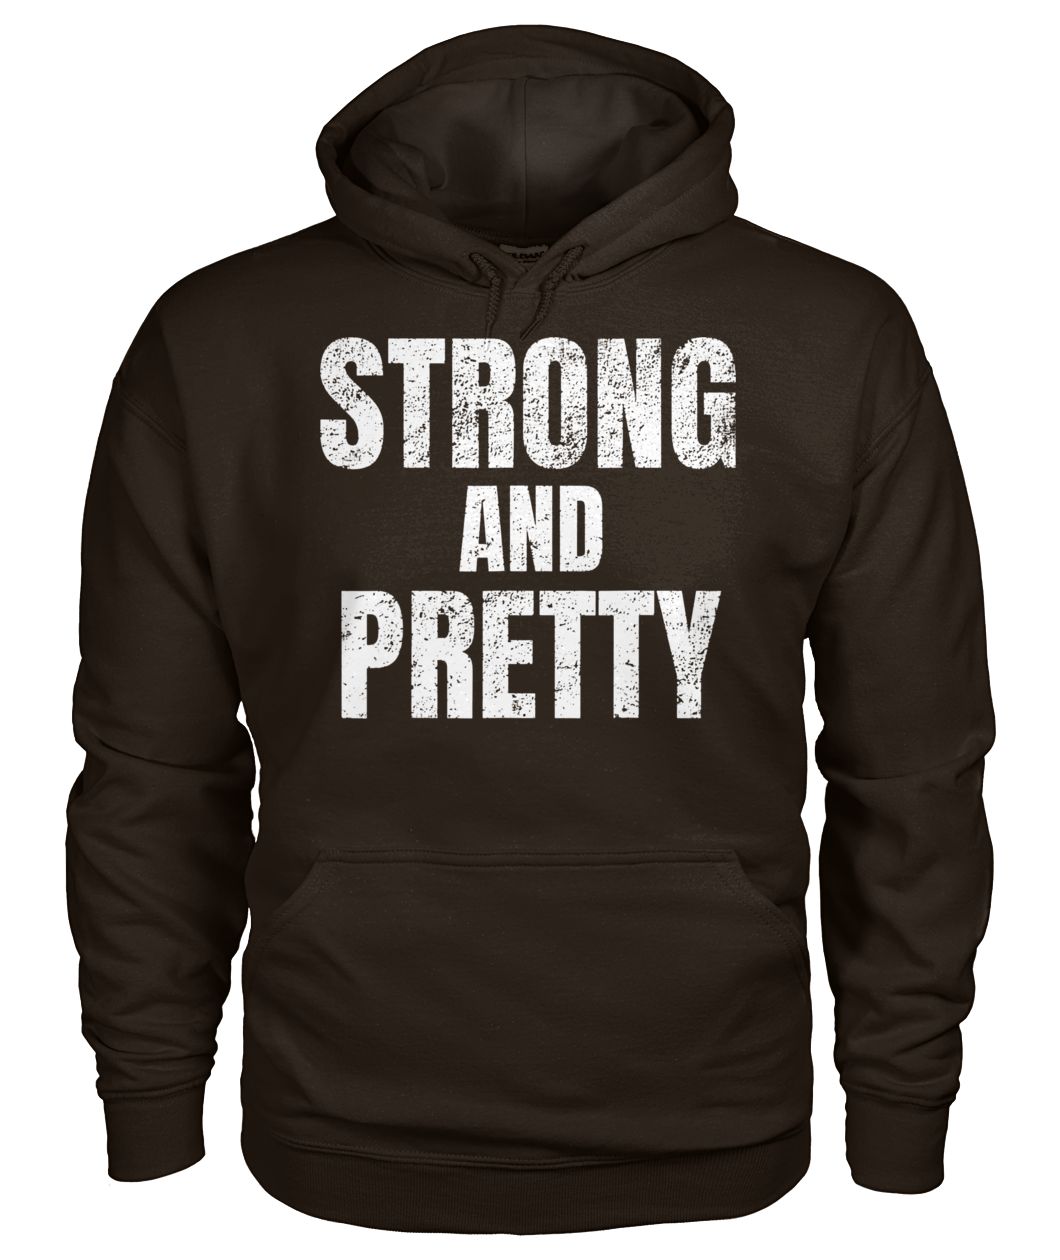 Motivation strong and pretty gildan hoodie